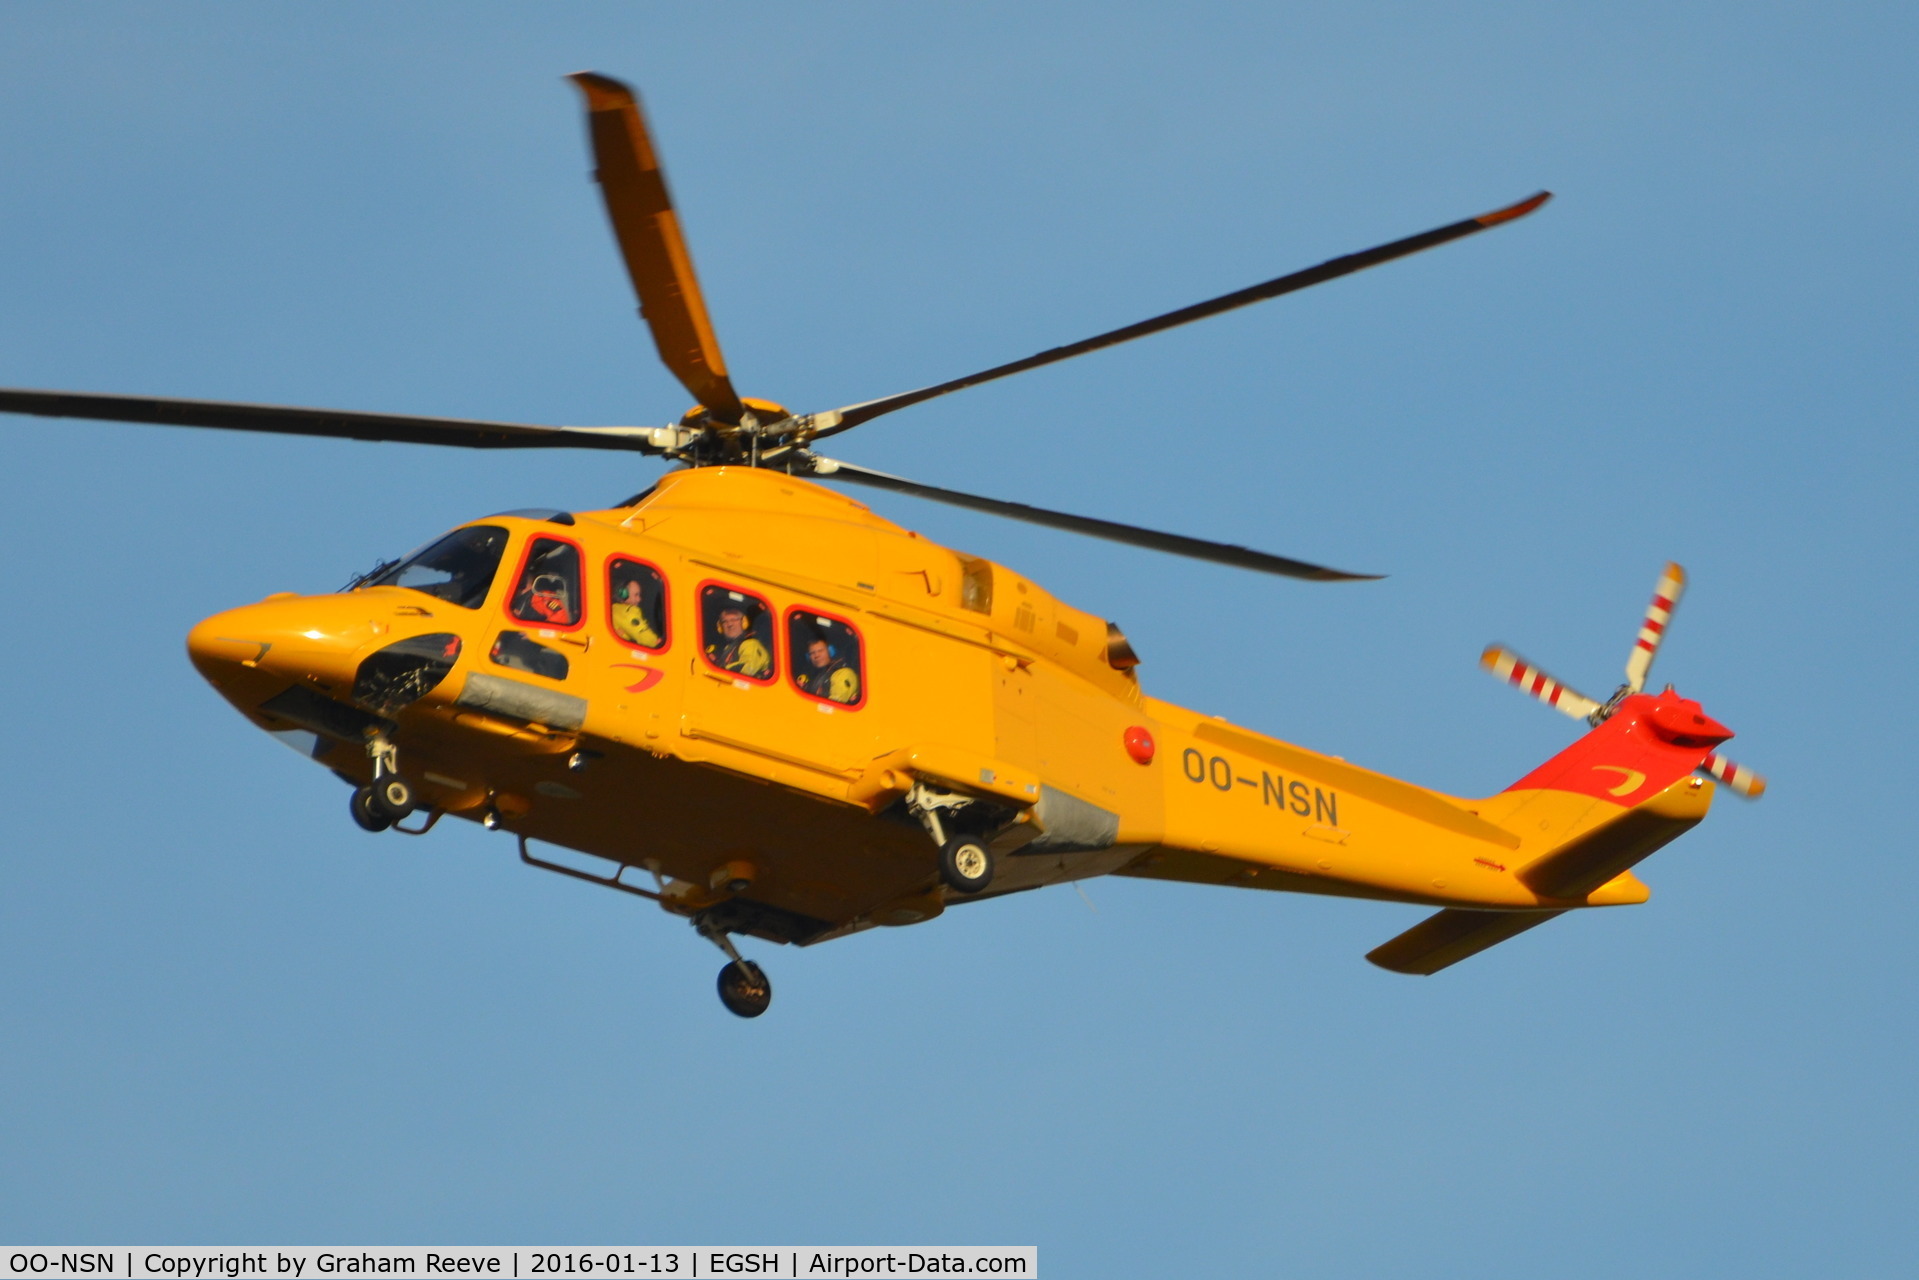 OO-NSN, 2015 AgustaWestland AW-139 C/N 31700, Now flying with a new tail logo and NHV stickers removed.